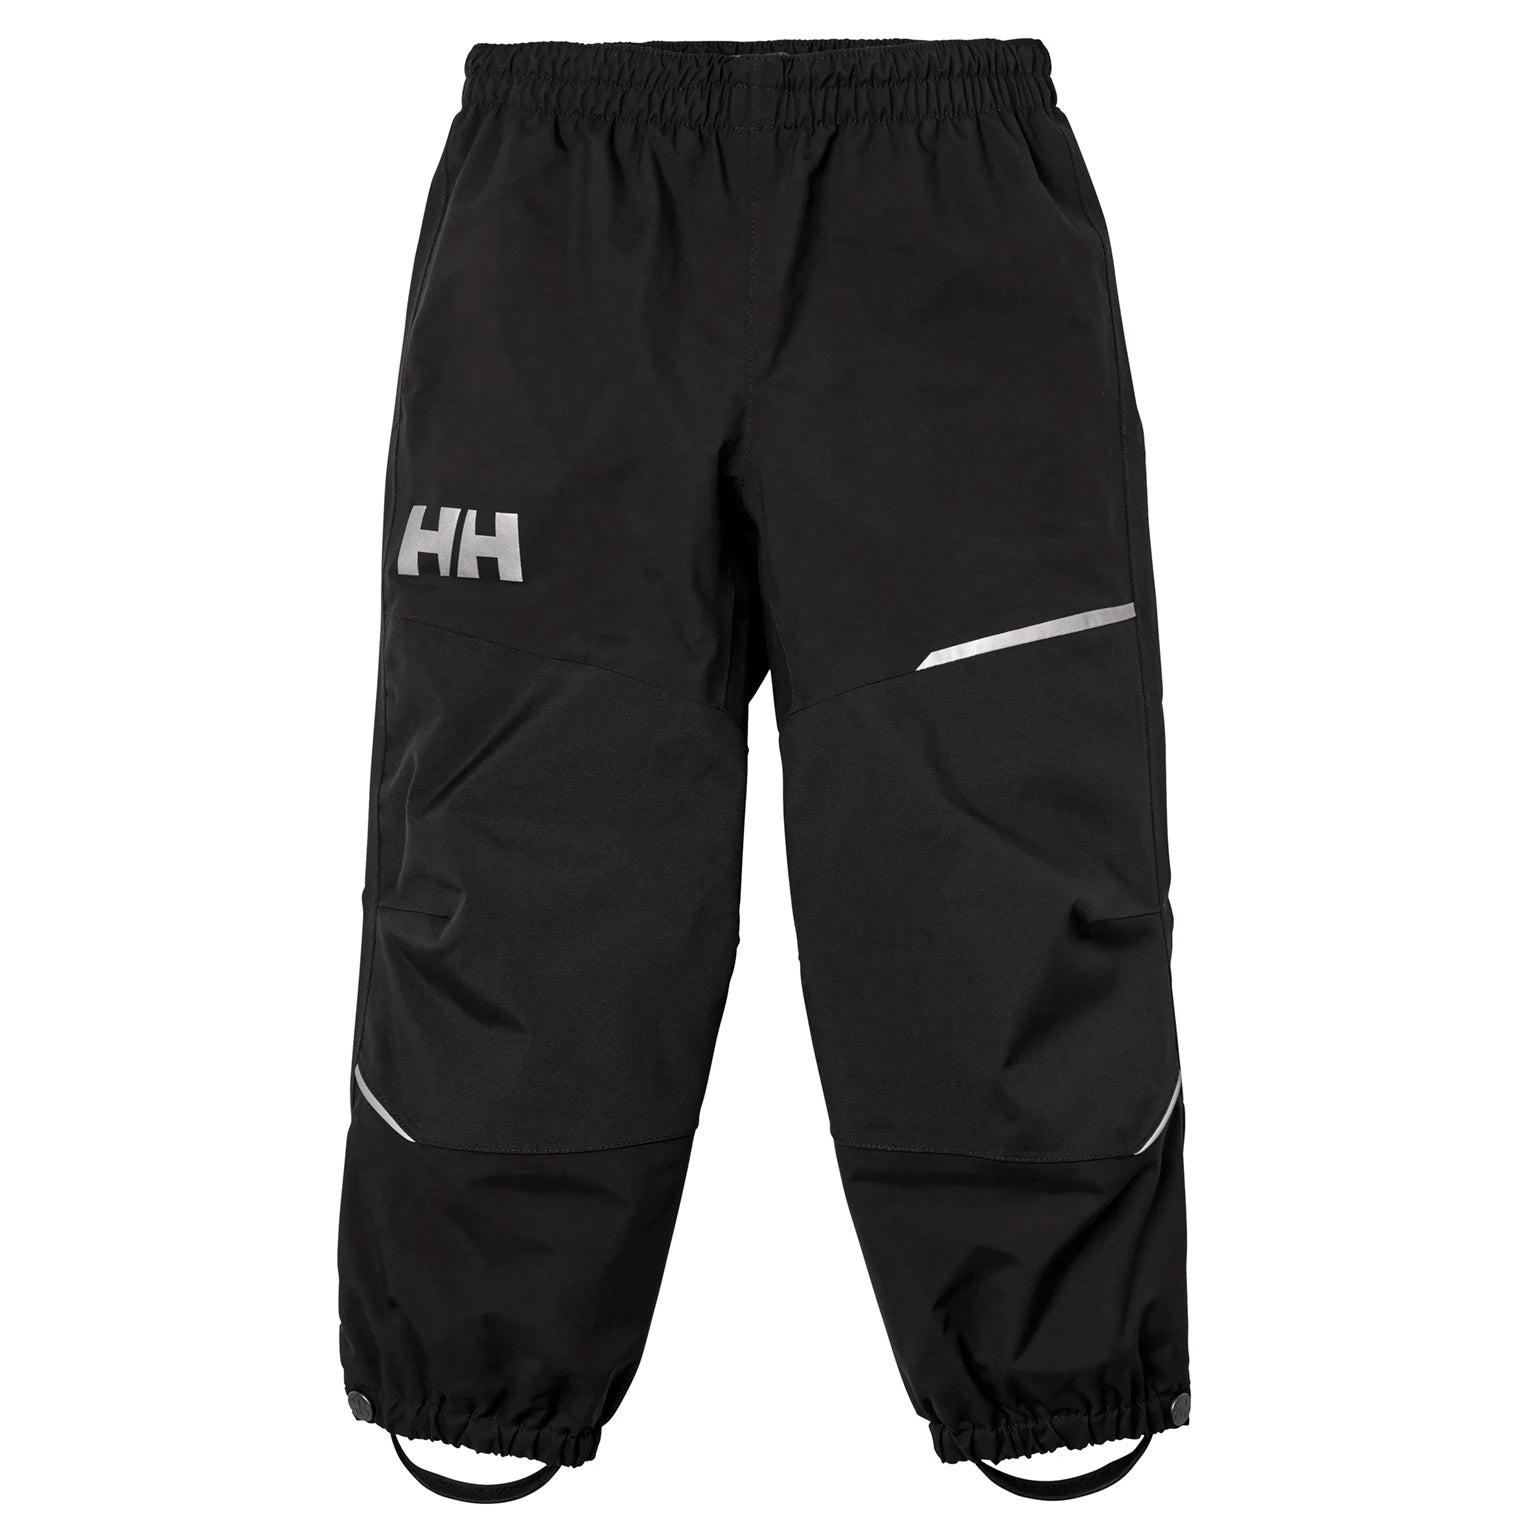 Helly Hansen Kids Sogn Rain Pant: Reliable Waterproof Protection